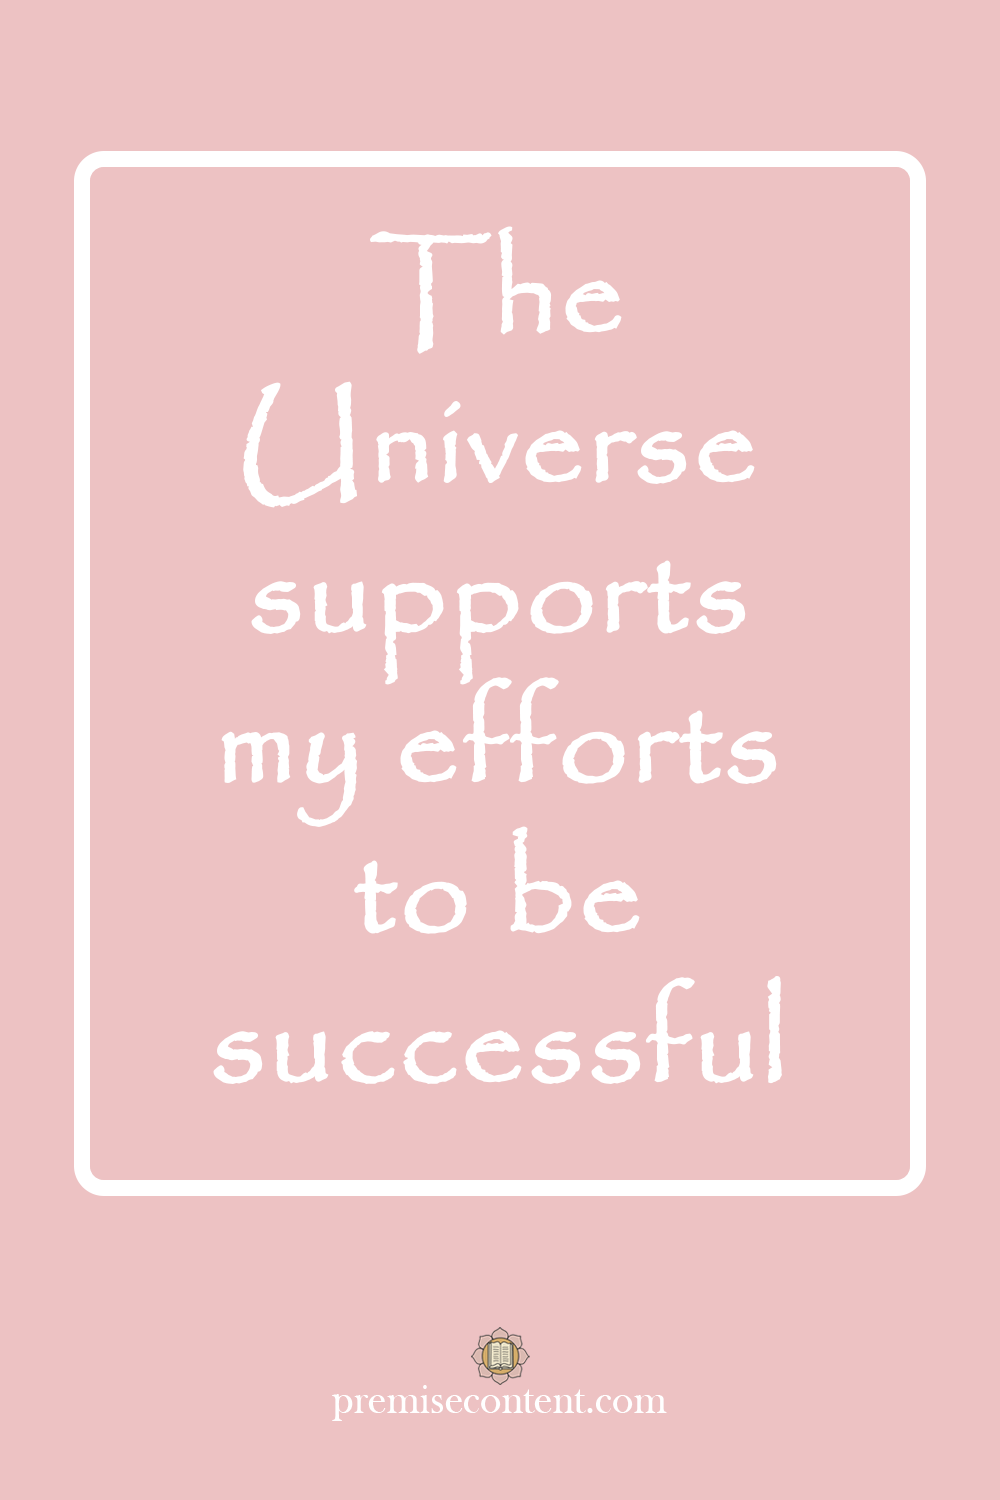 Positive Affirmation - The Universe supports my efforts to be successful.